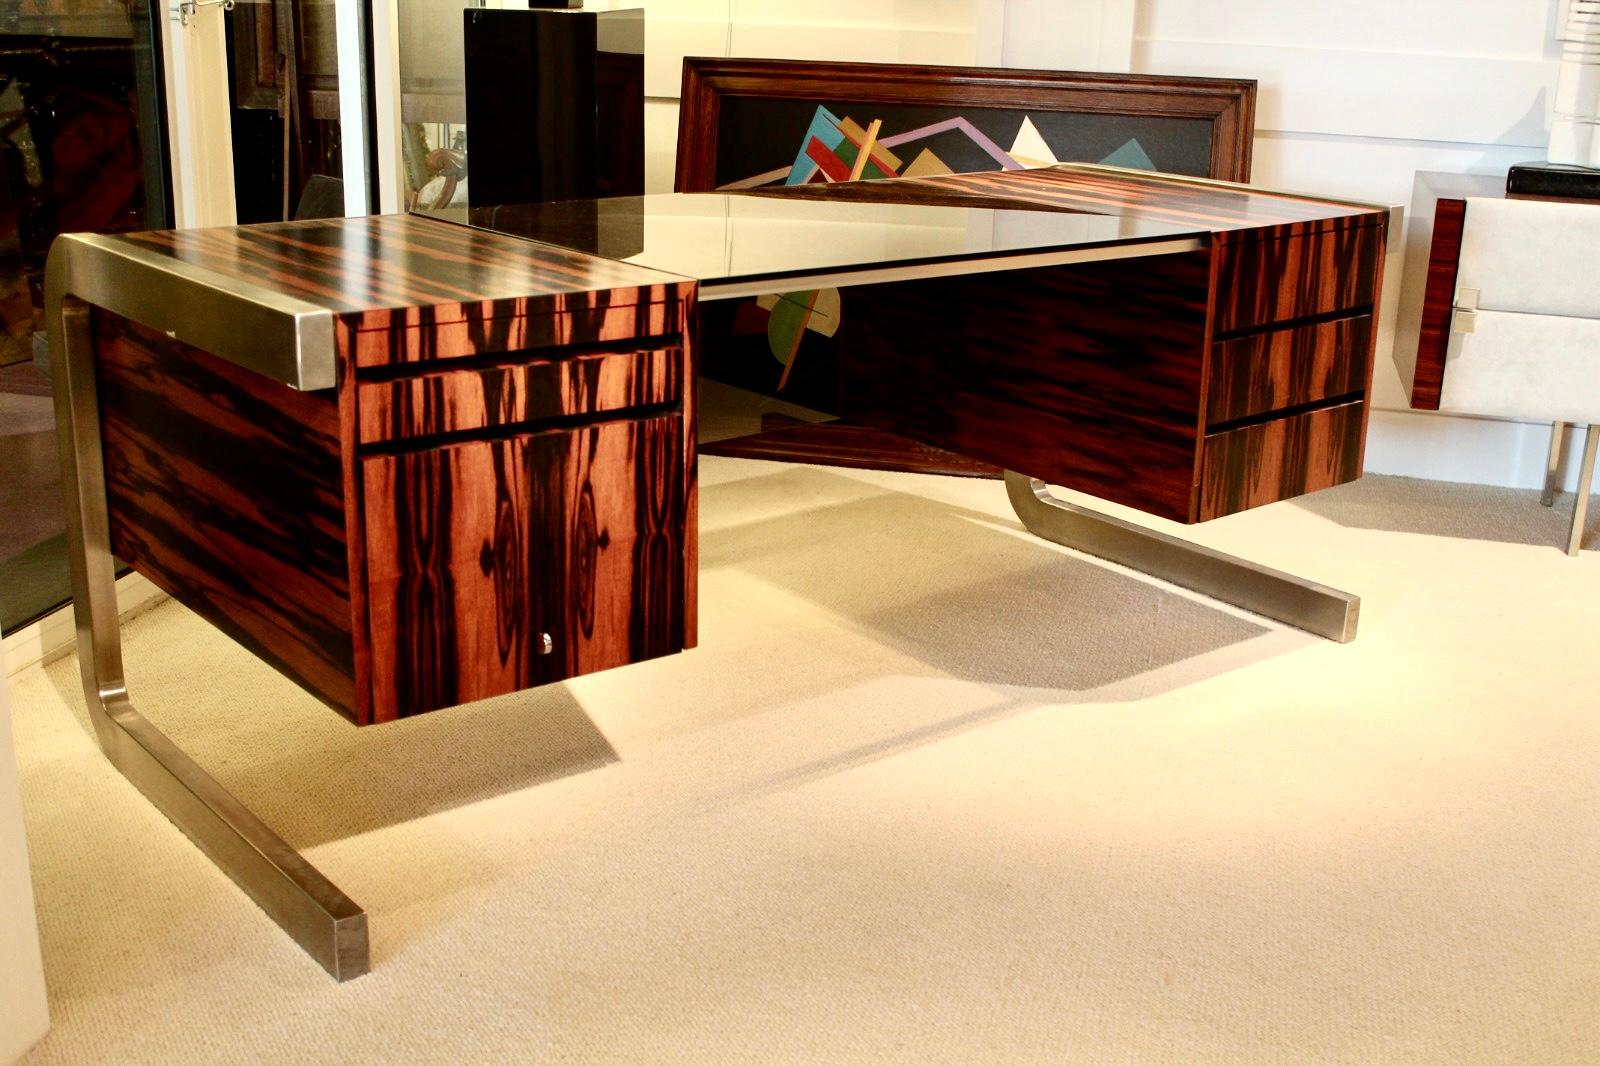 Wood and aluminium desk table, 1960s
Macassar wood from Indonesia.